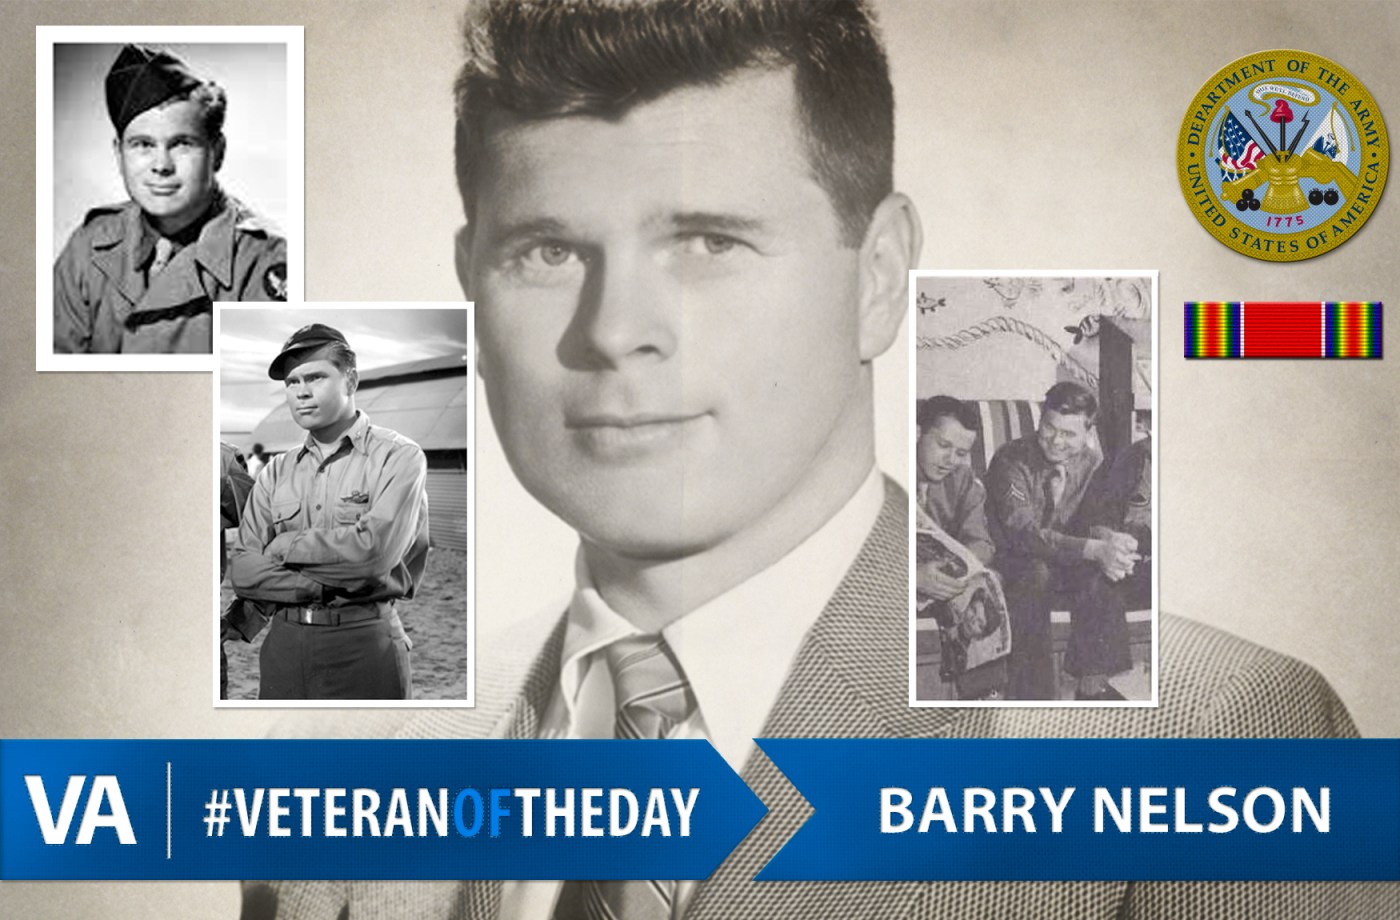 Veteran of the Day Barry Nelson